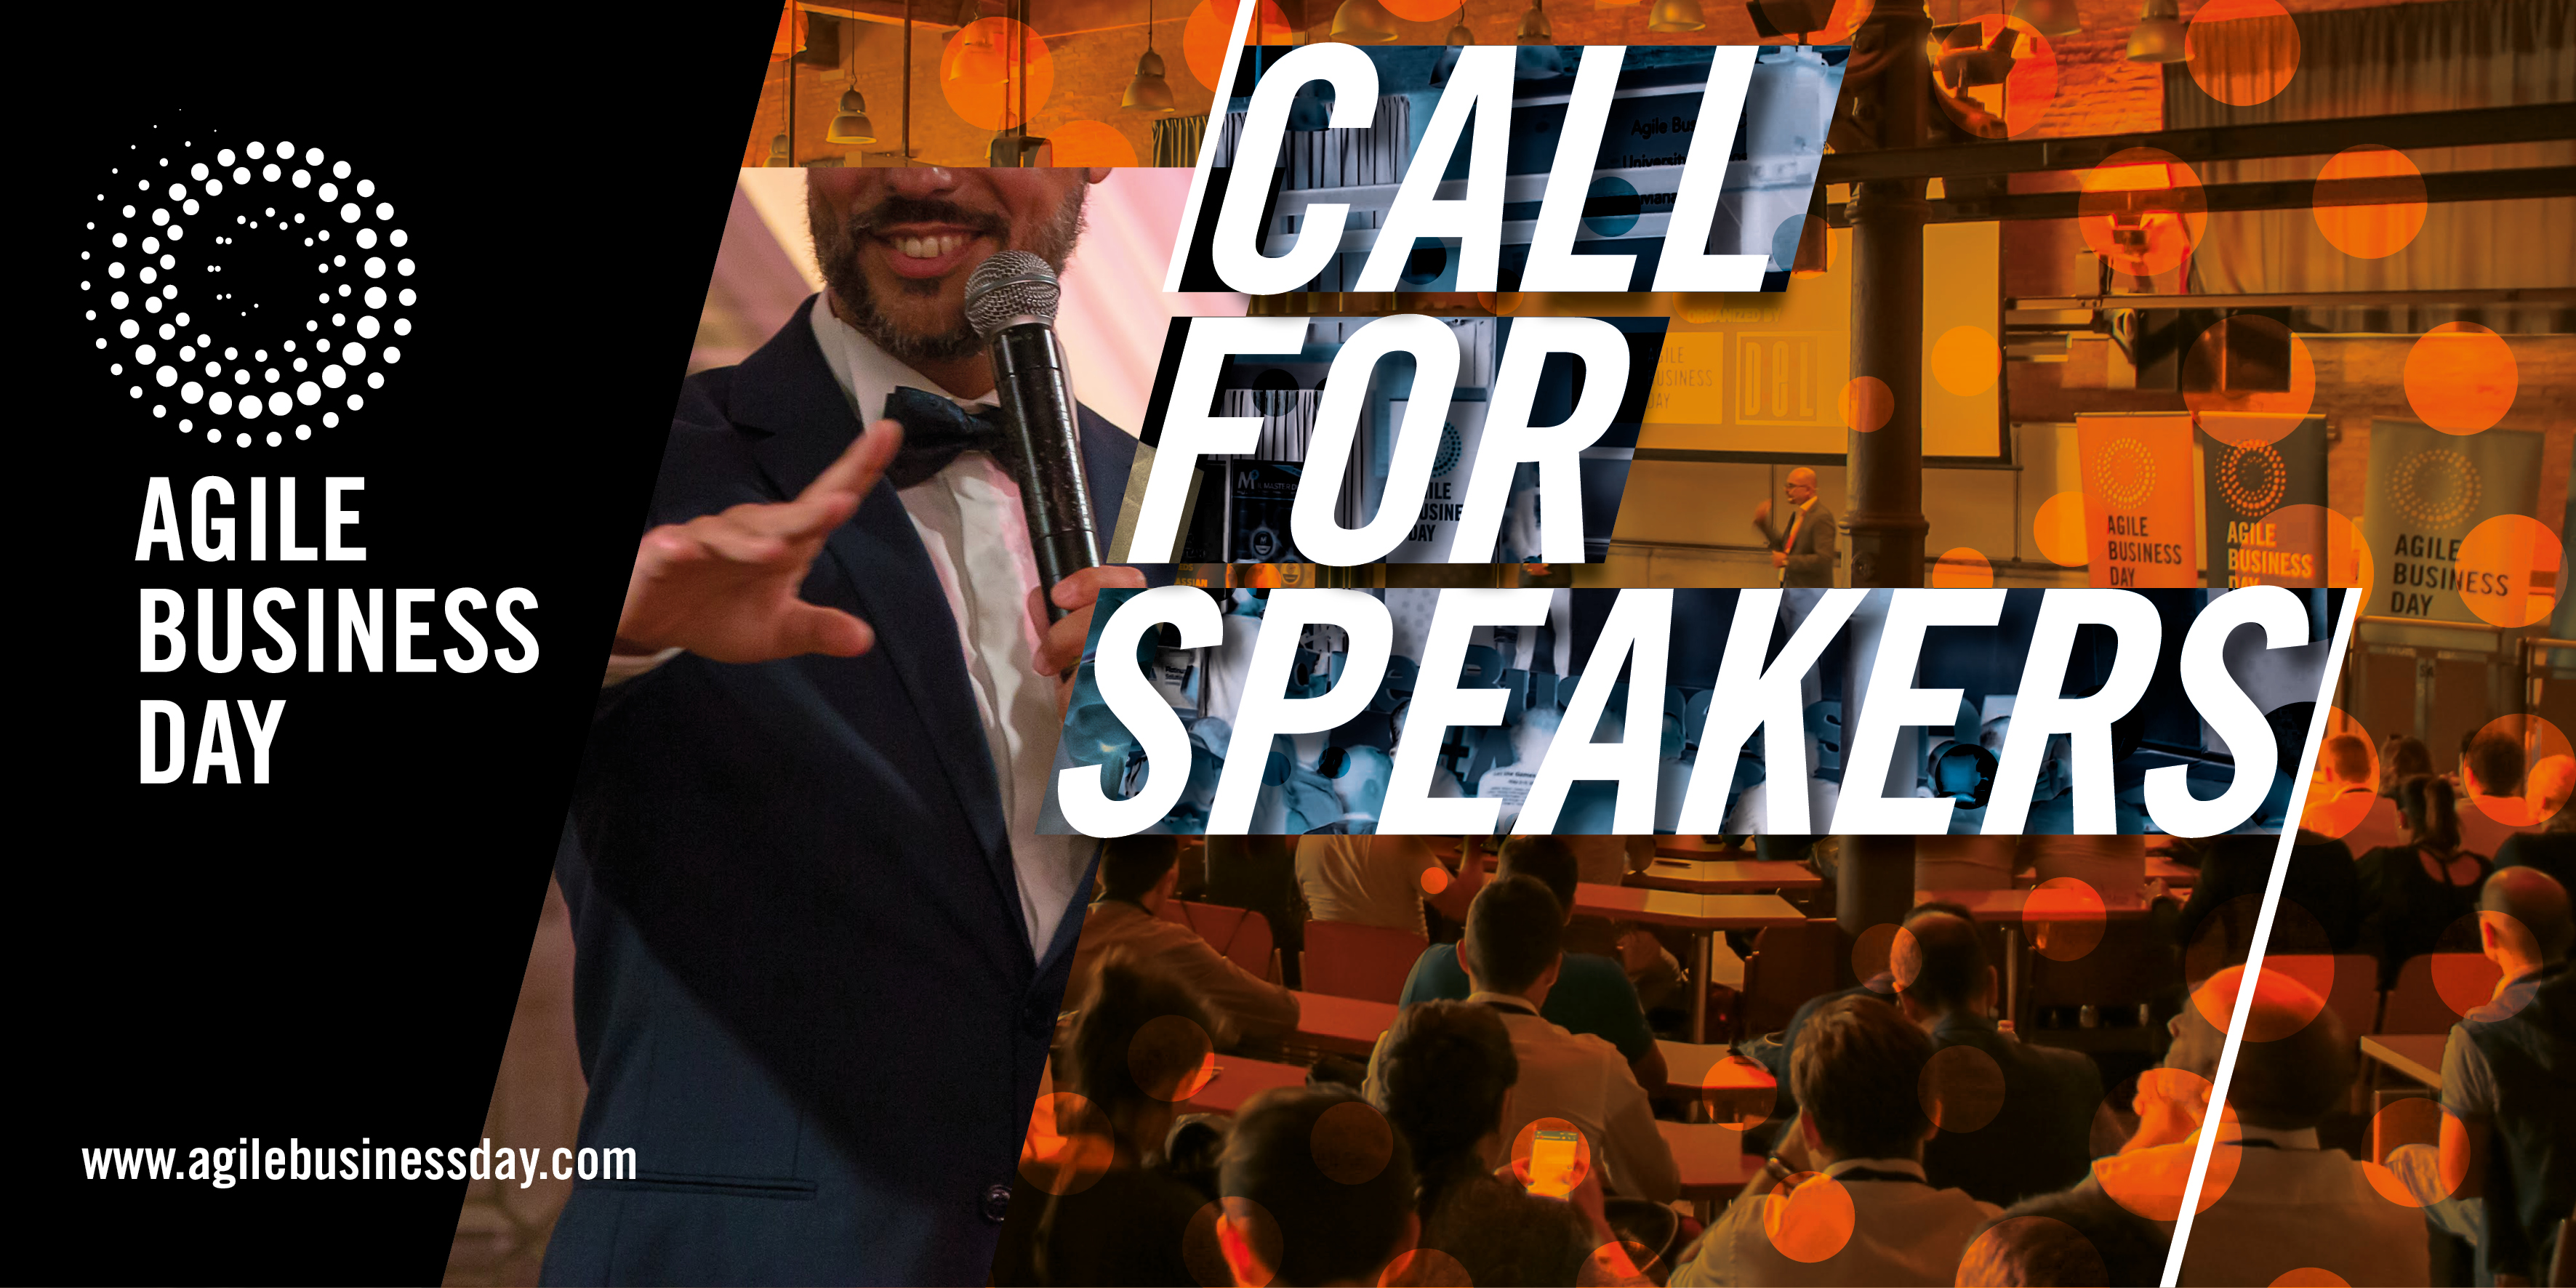 CALL FOR SPEAKERS